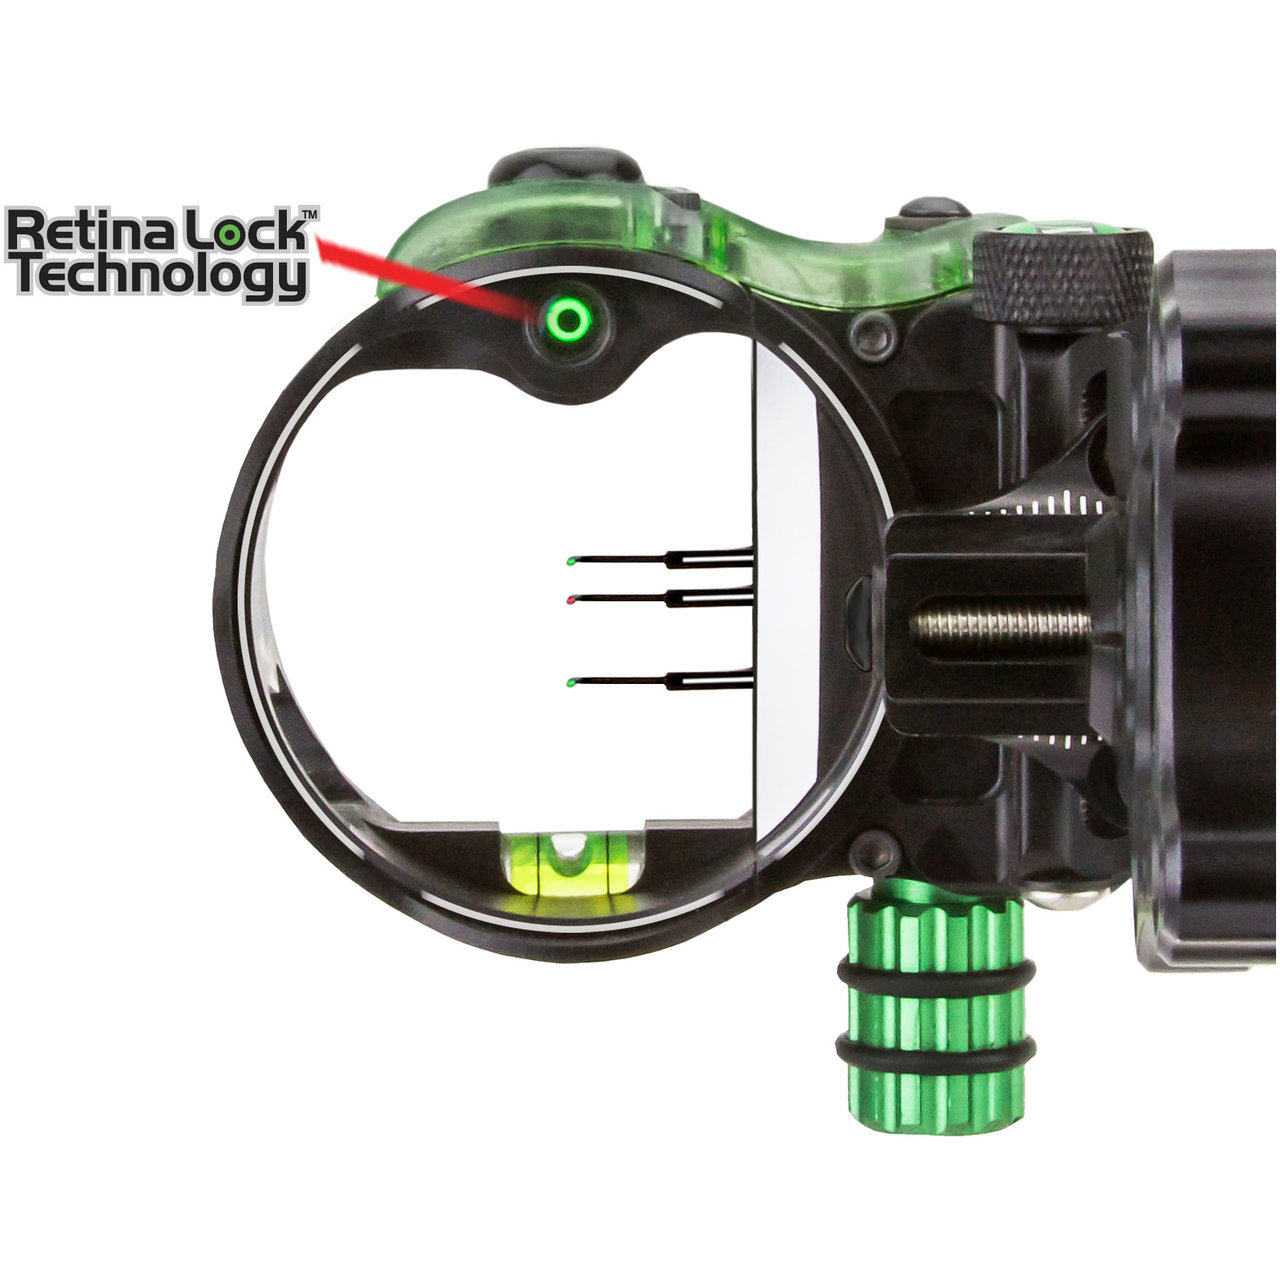 Compound bows and their accessories are probably quite a bit more modern than you expect. Pictured - bow sight with holdover pins. Image credit: Advanced Archery